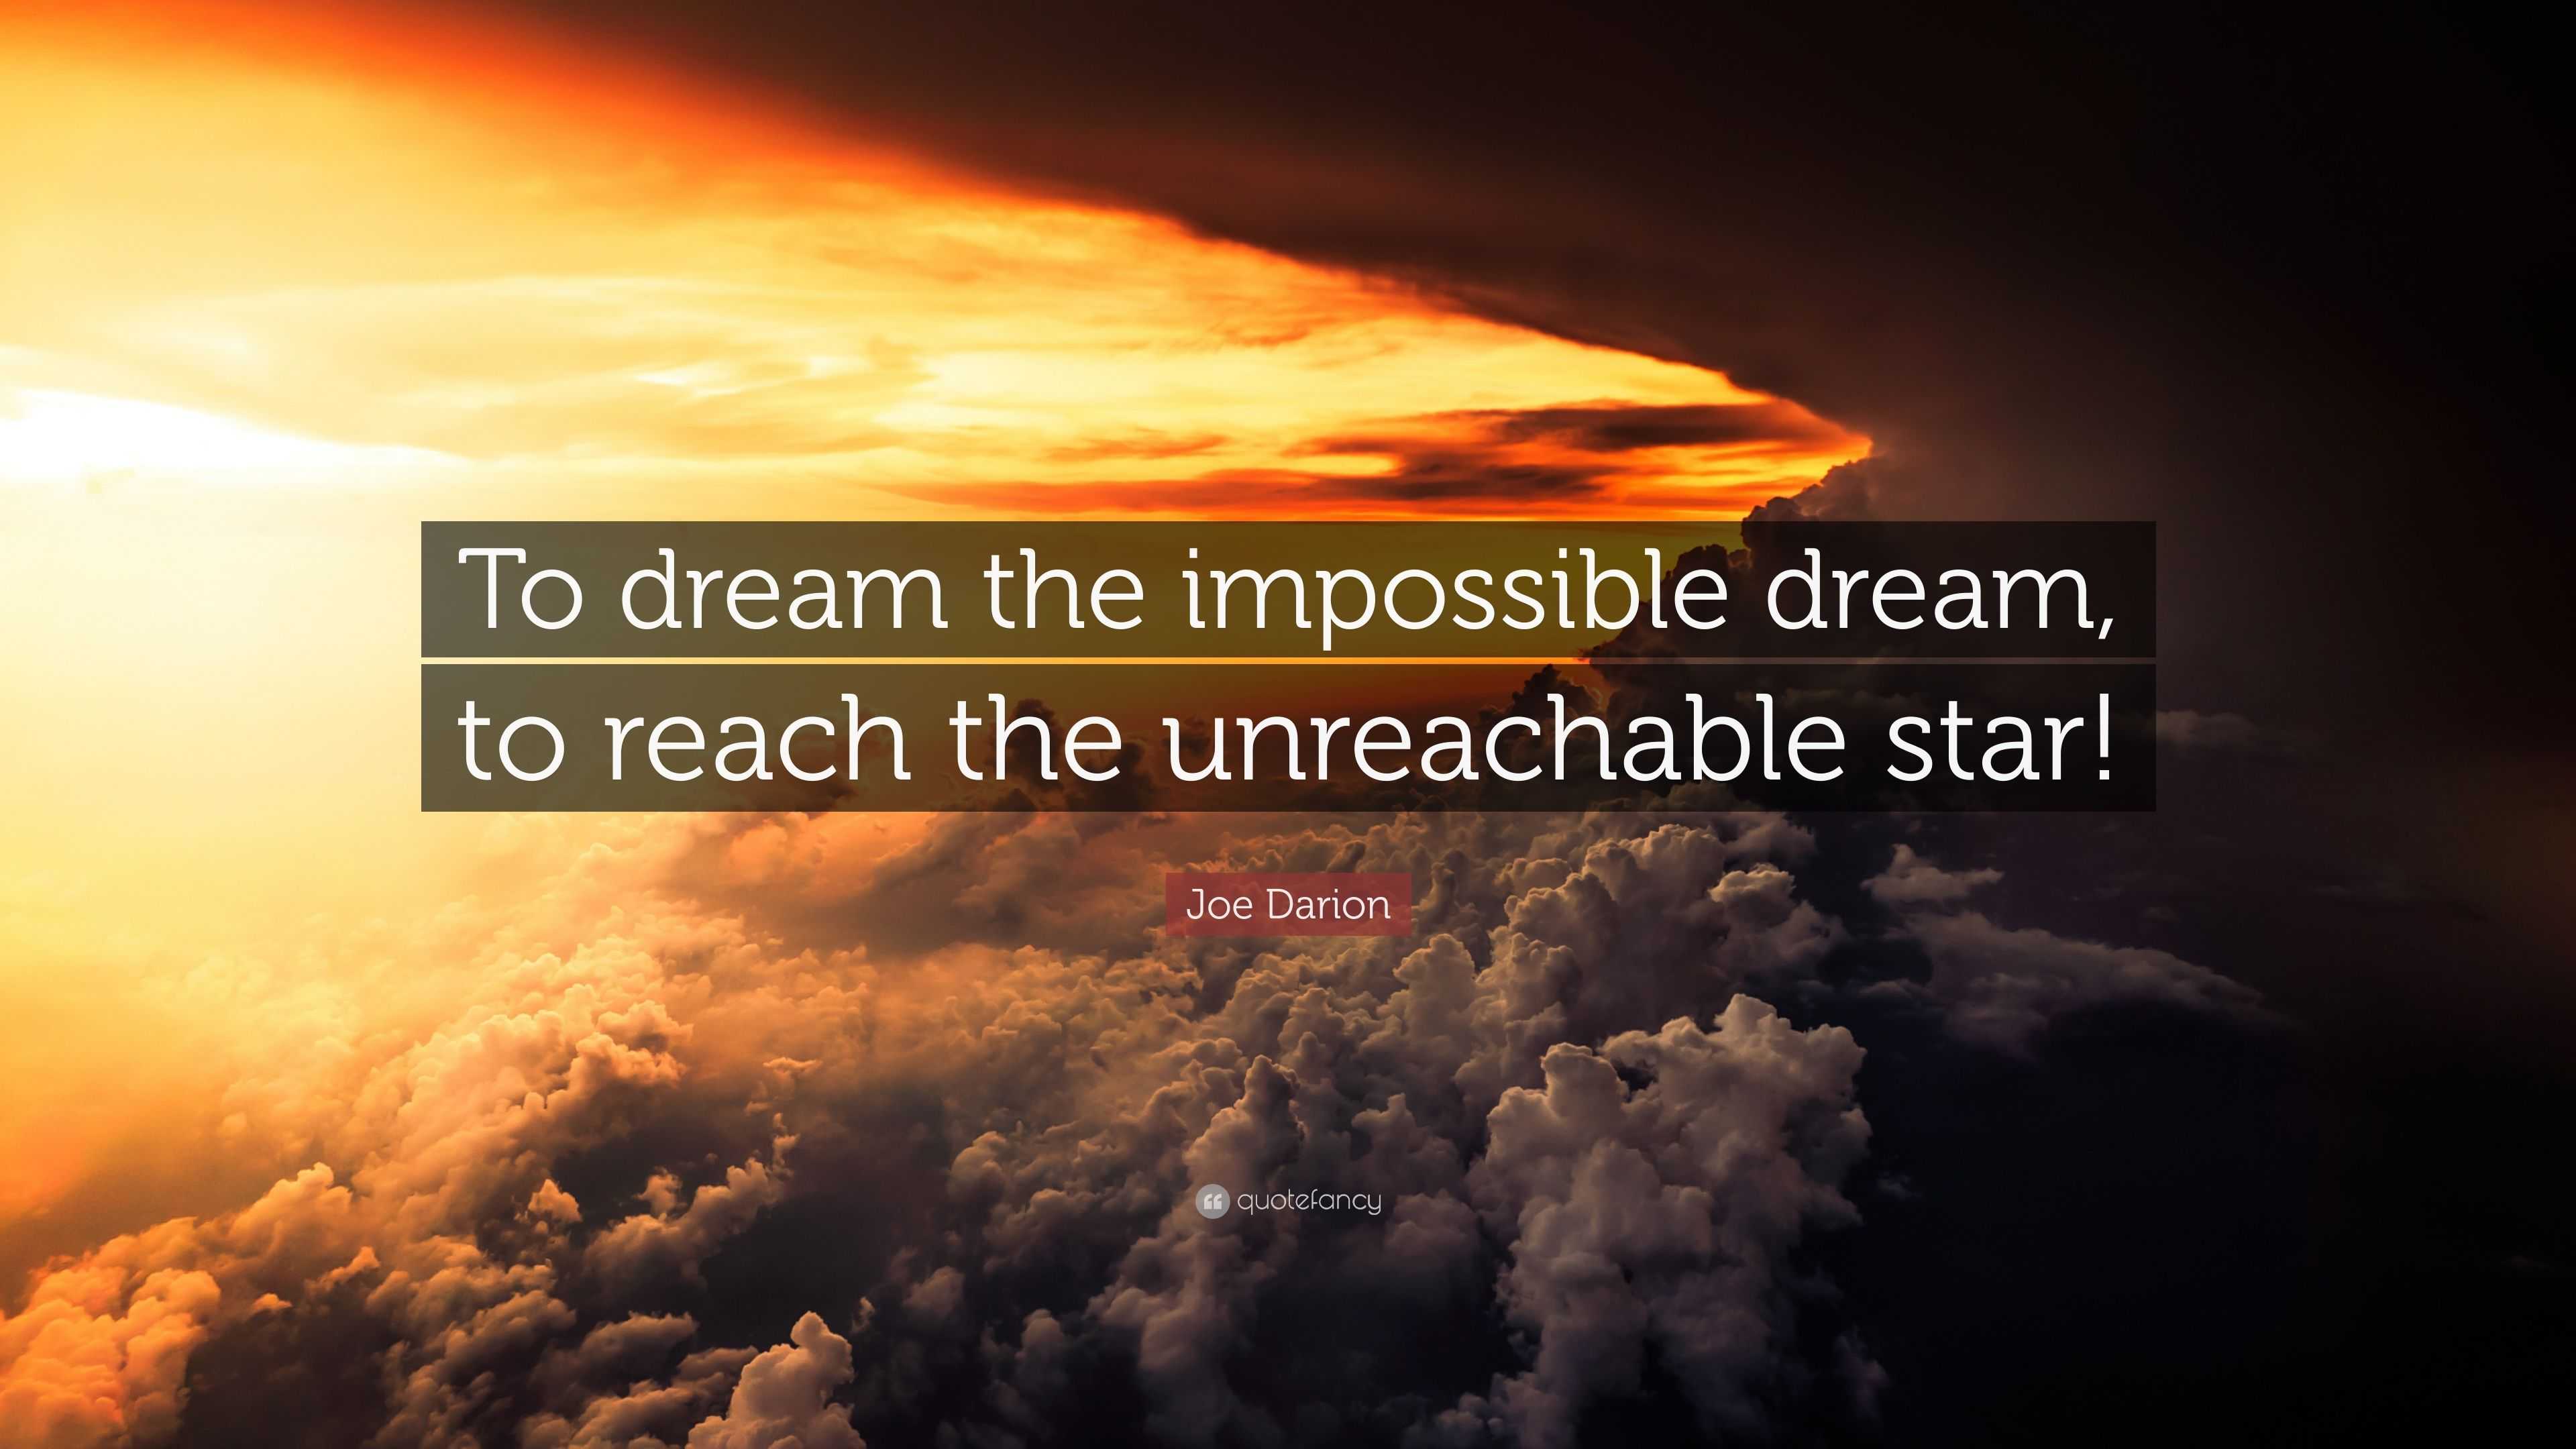 Joe Darion Quote: “To dream the impossible dream, to reach the